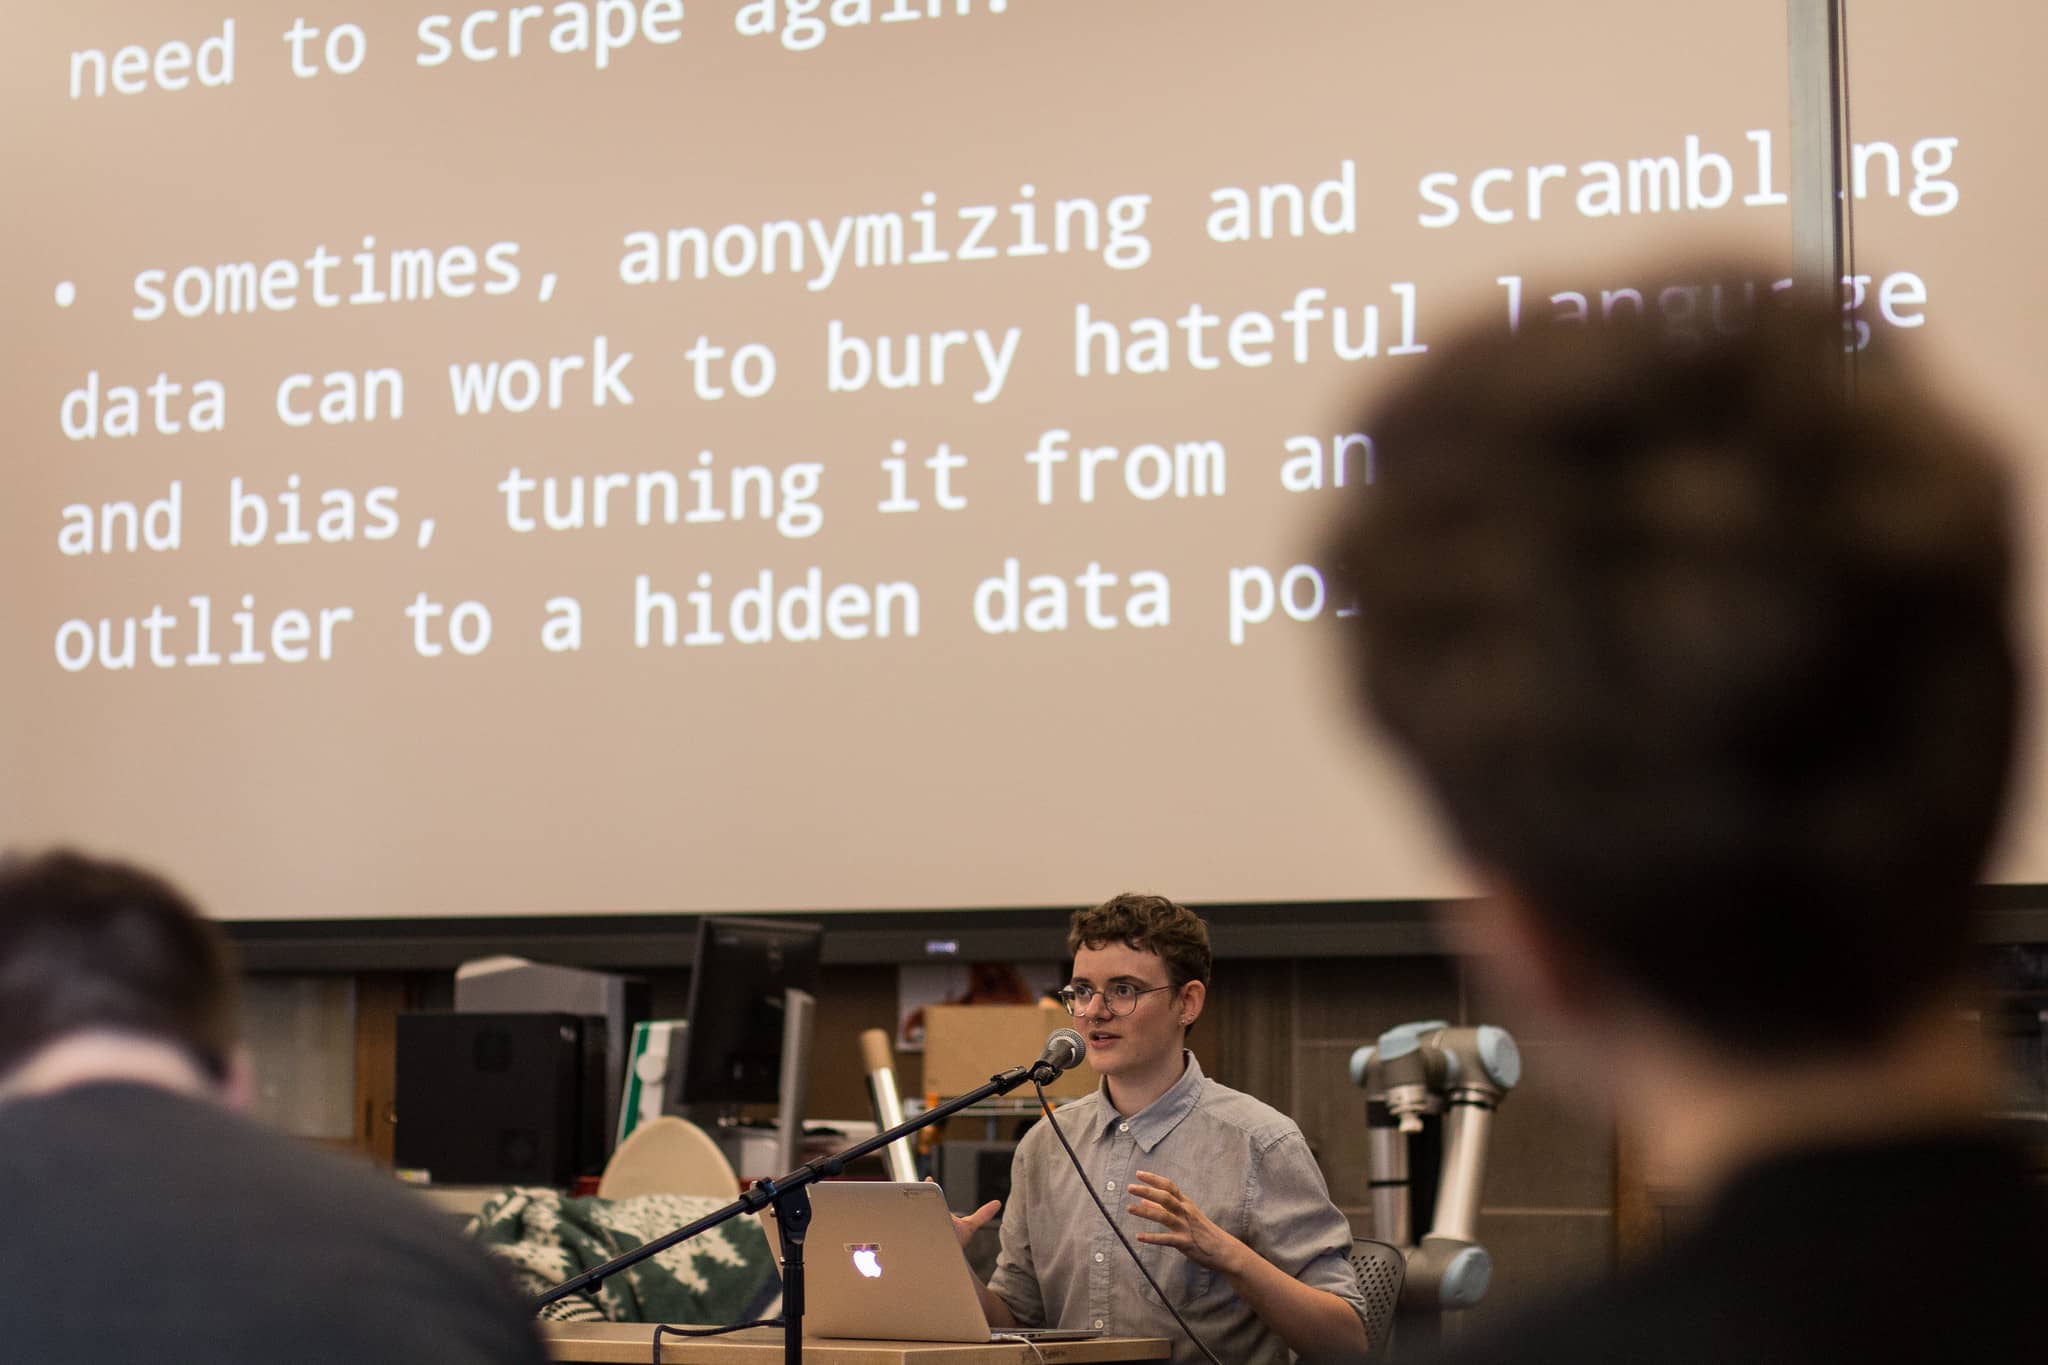 Participant speaks at a podium in front of projected text about the problem with anonymyzing data"